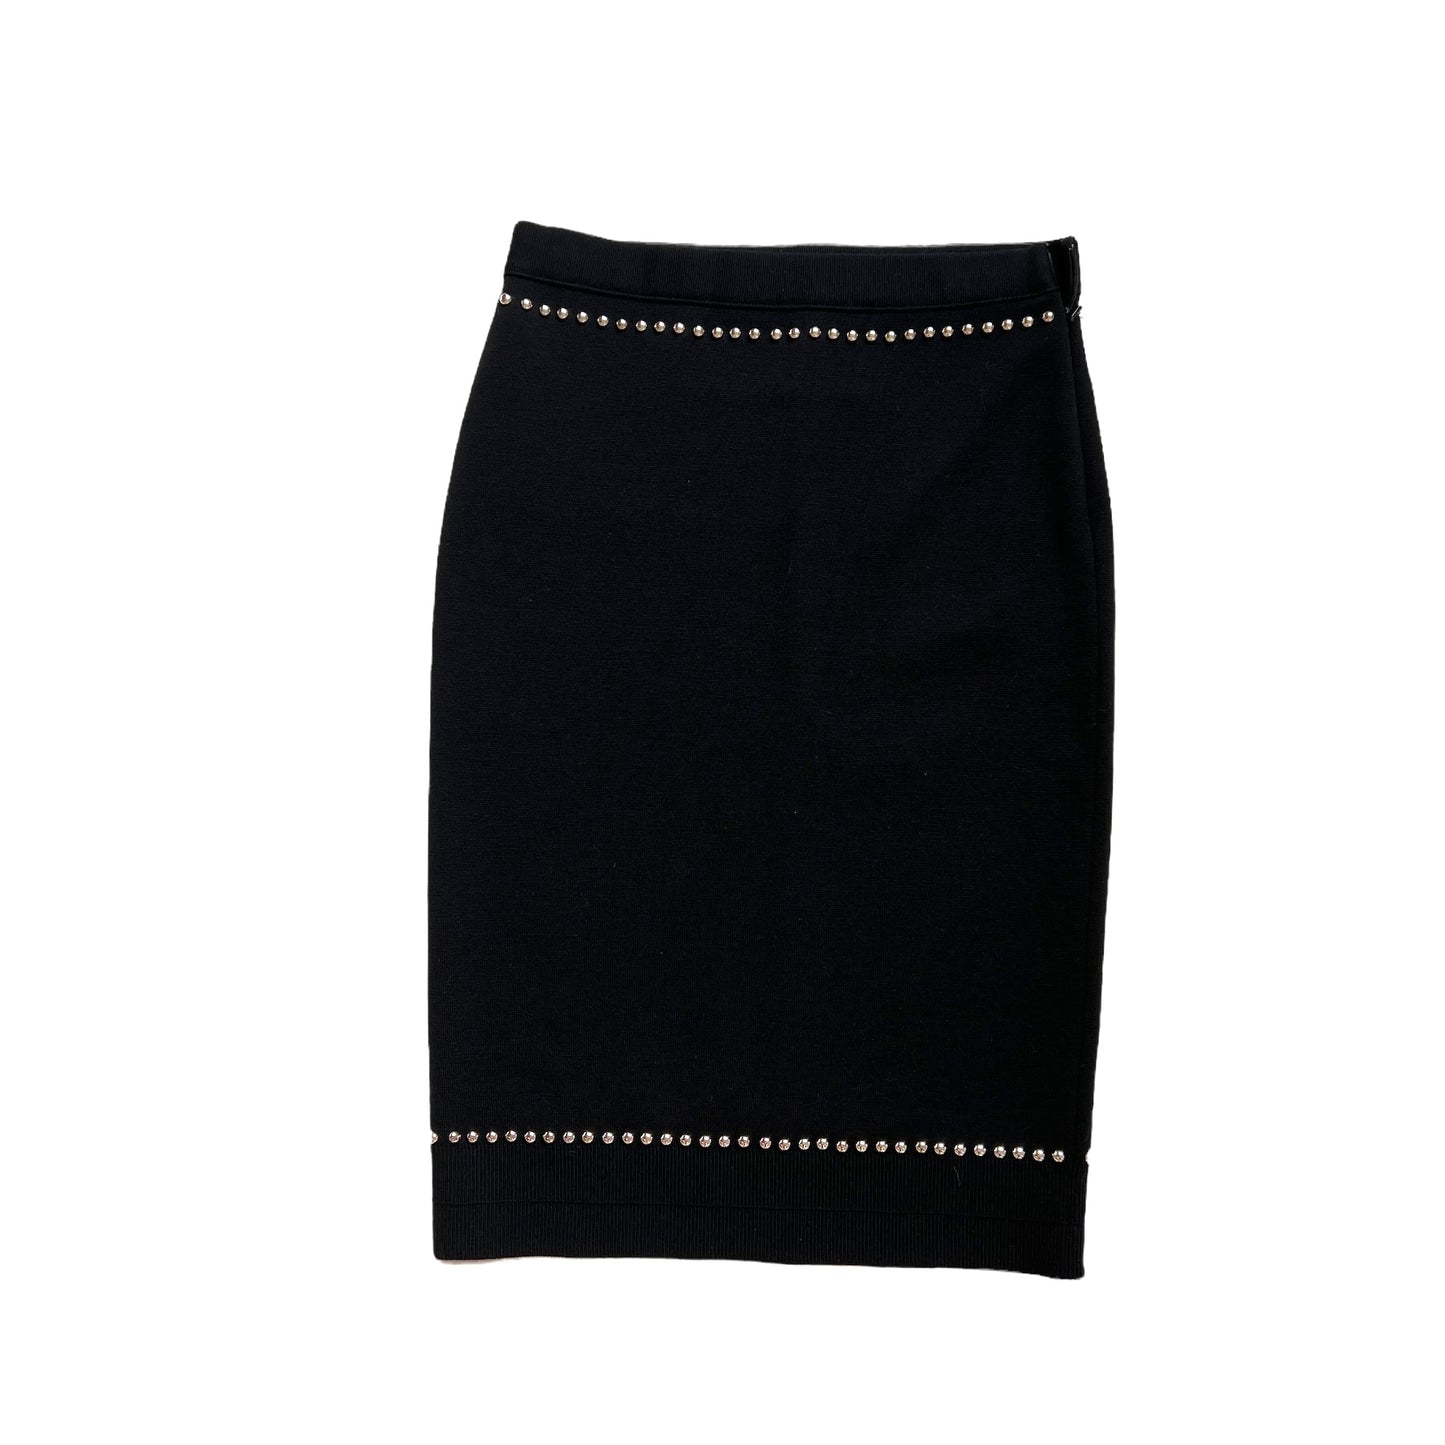 Black Wool Skirt with Studs - M